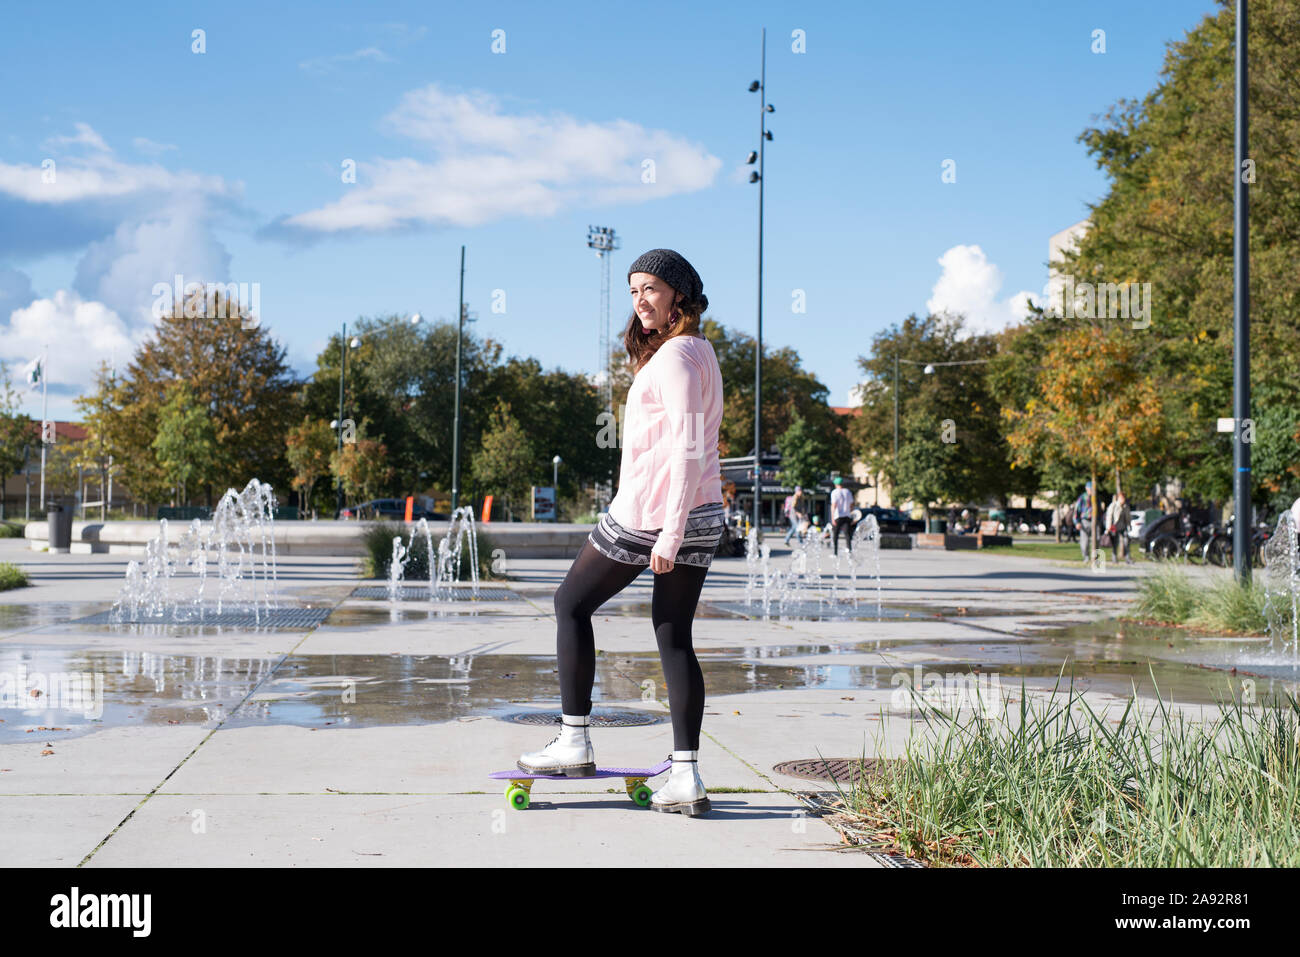 Young woman with skateboard Stock Photo